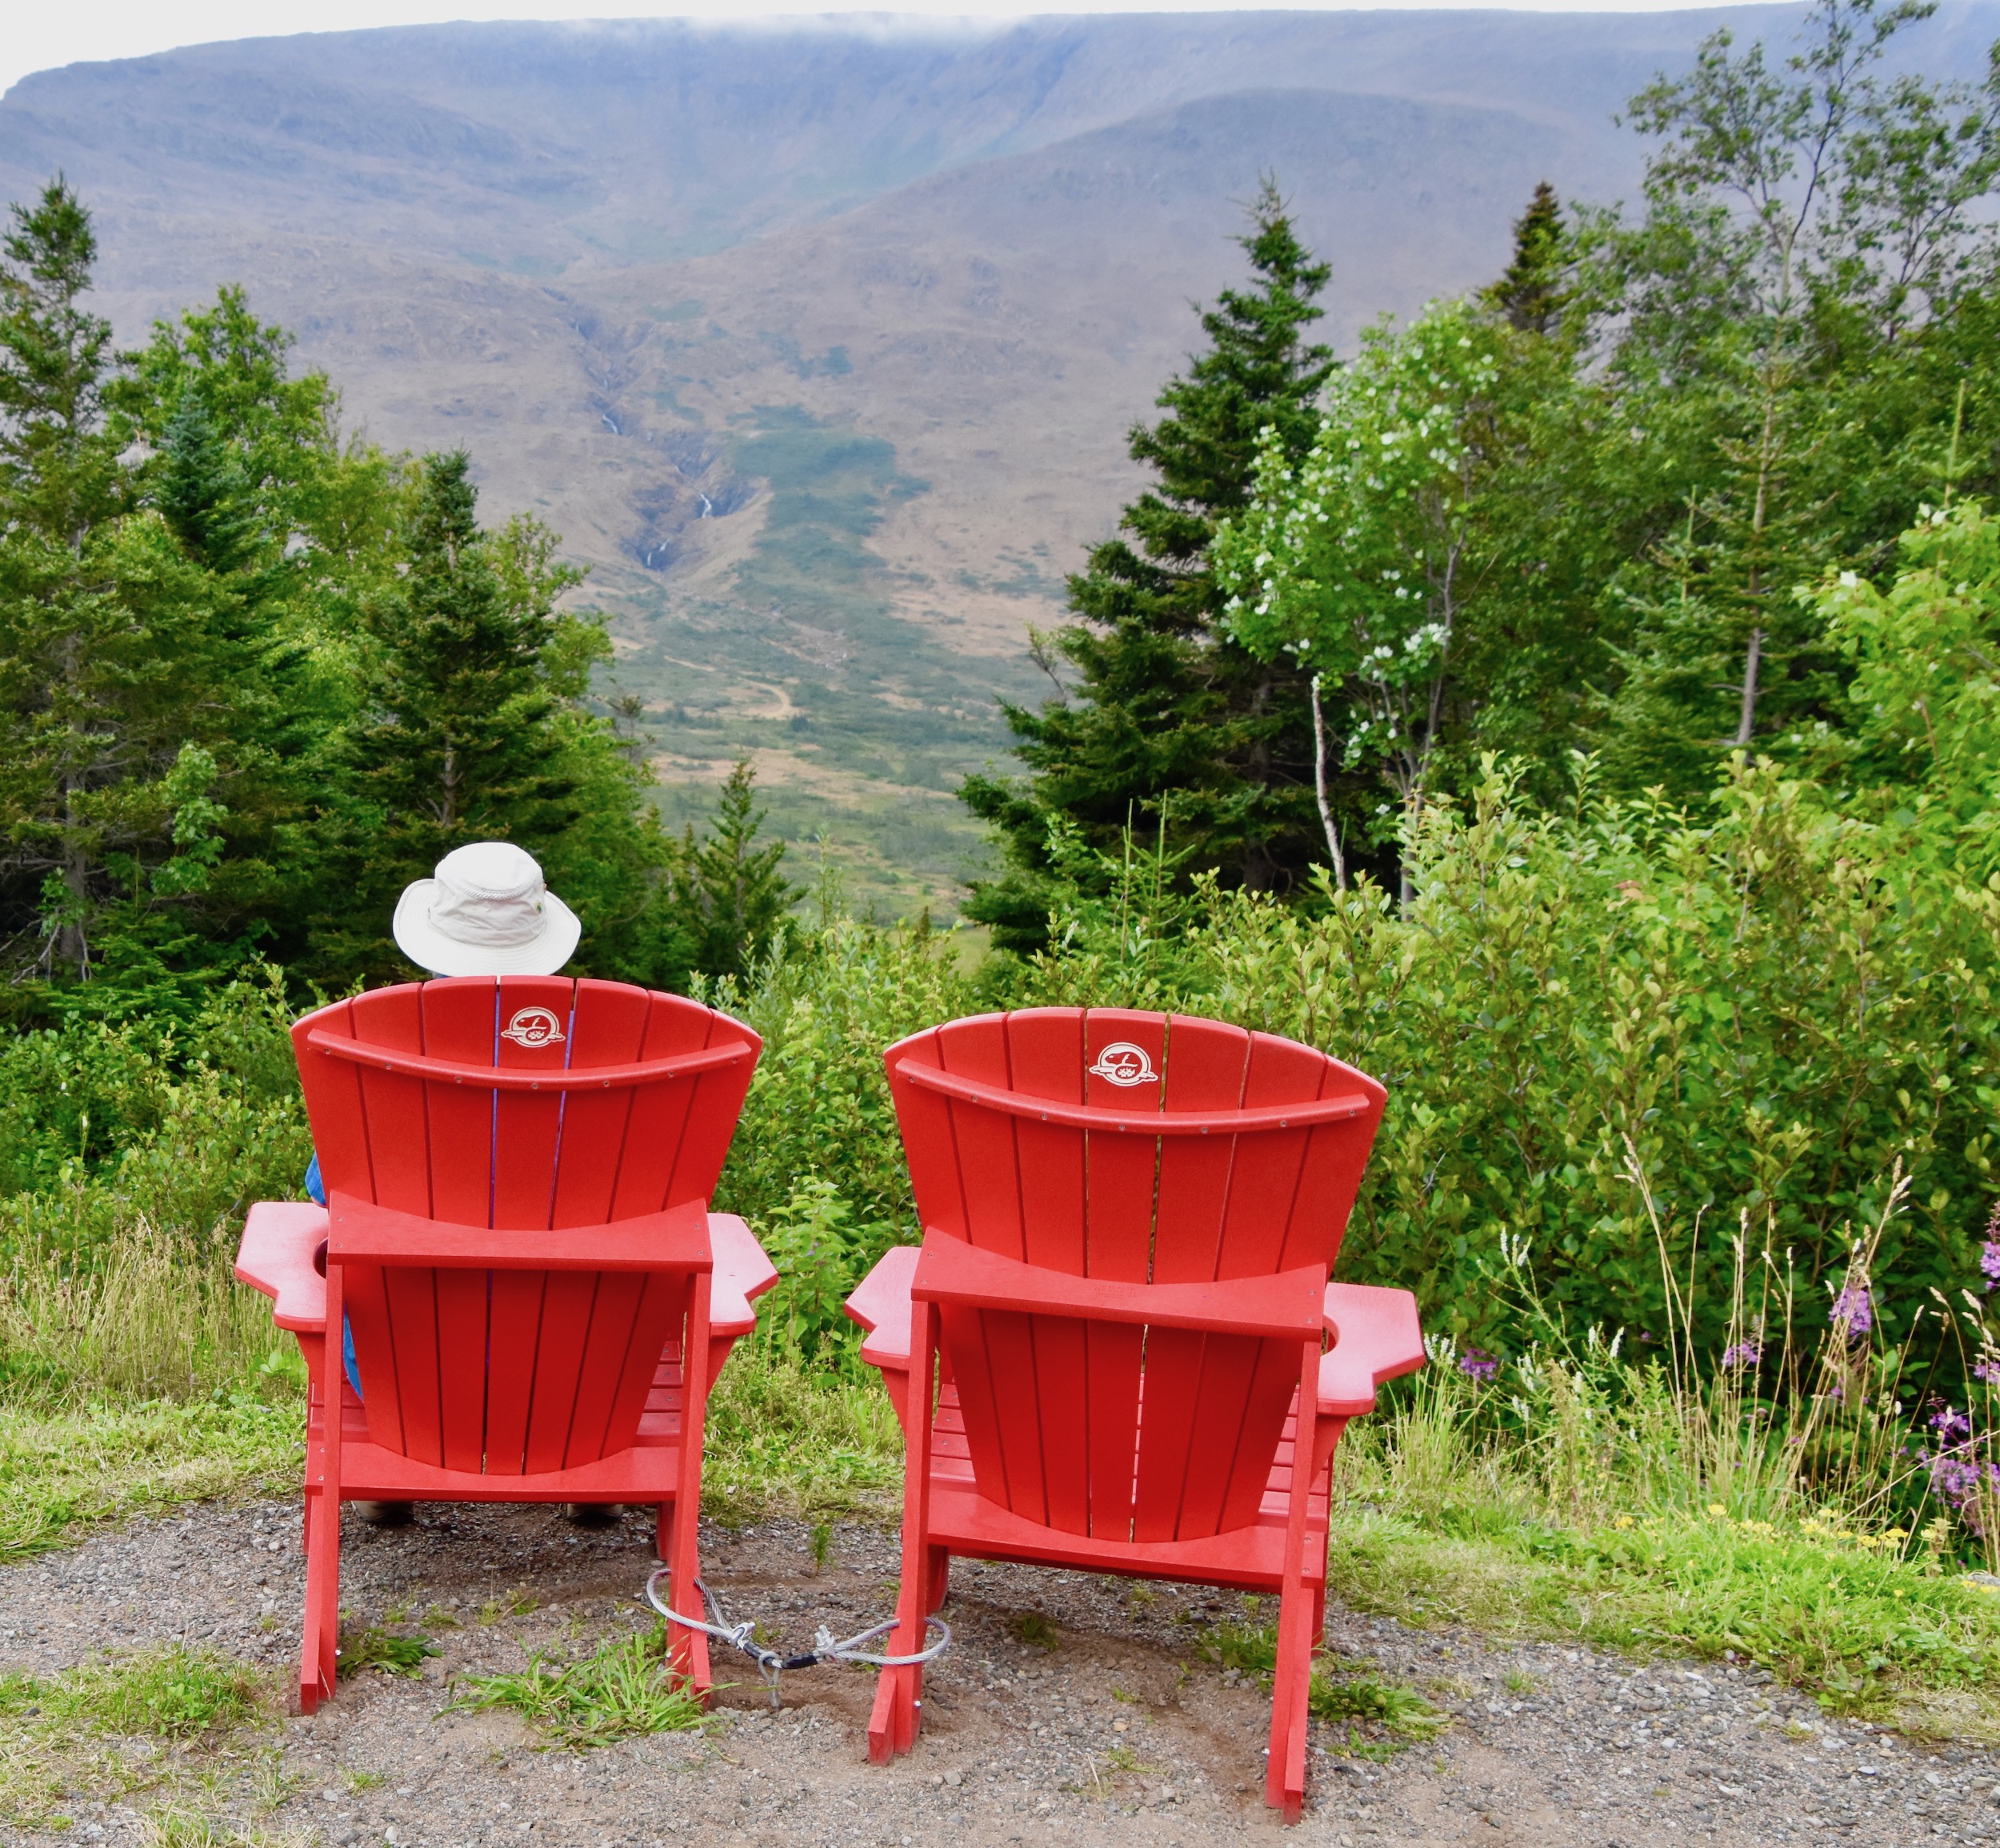 The Tablelands fro Red Chairs